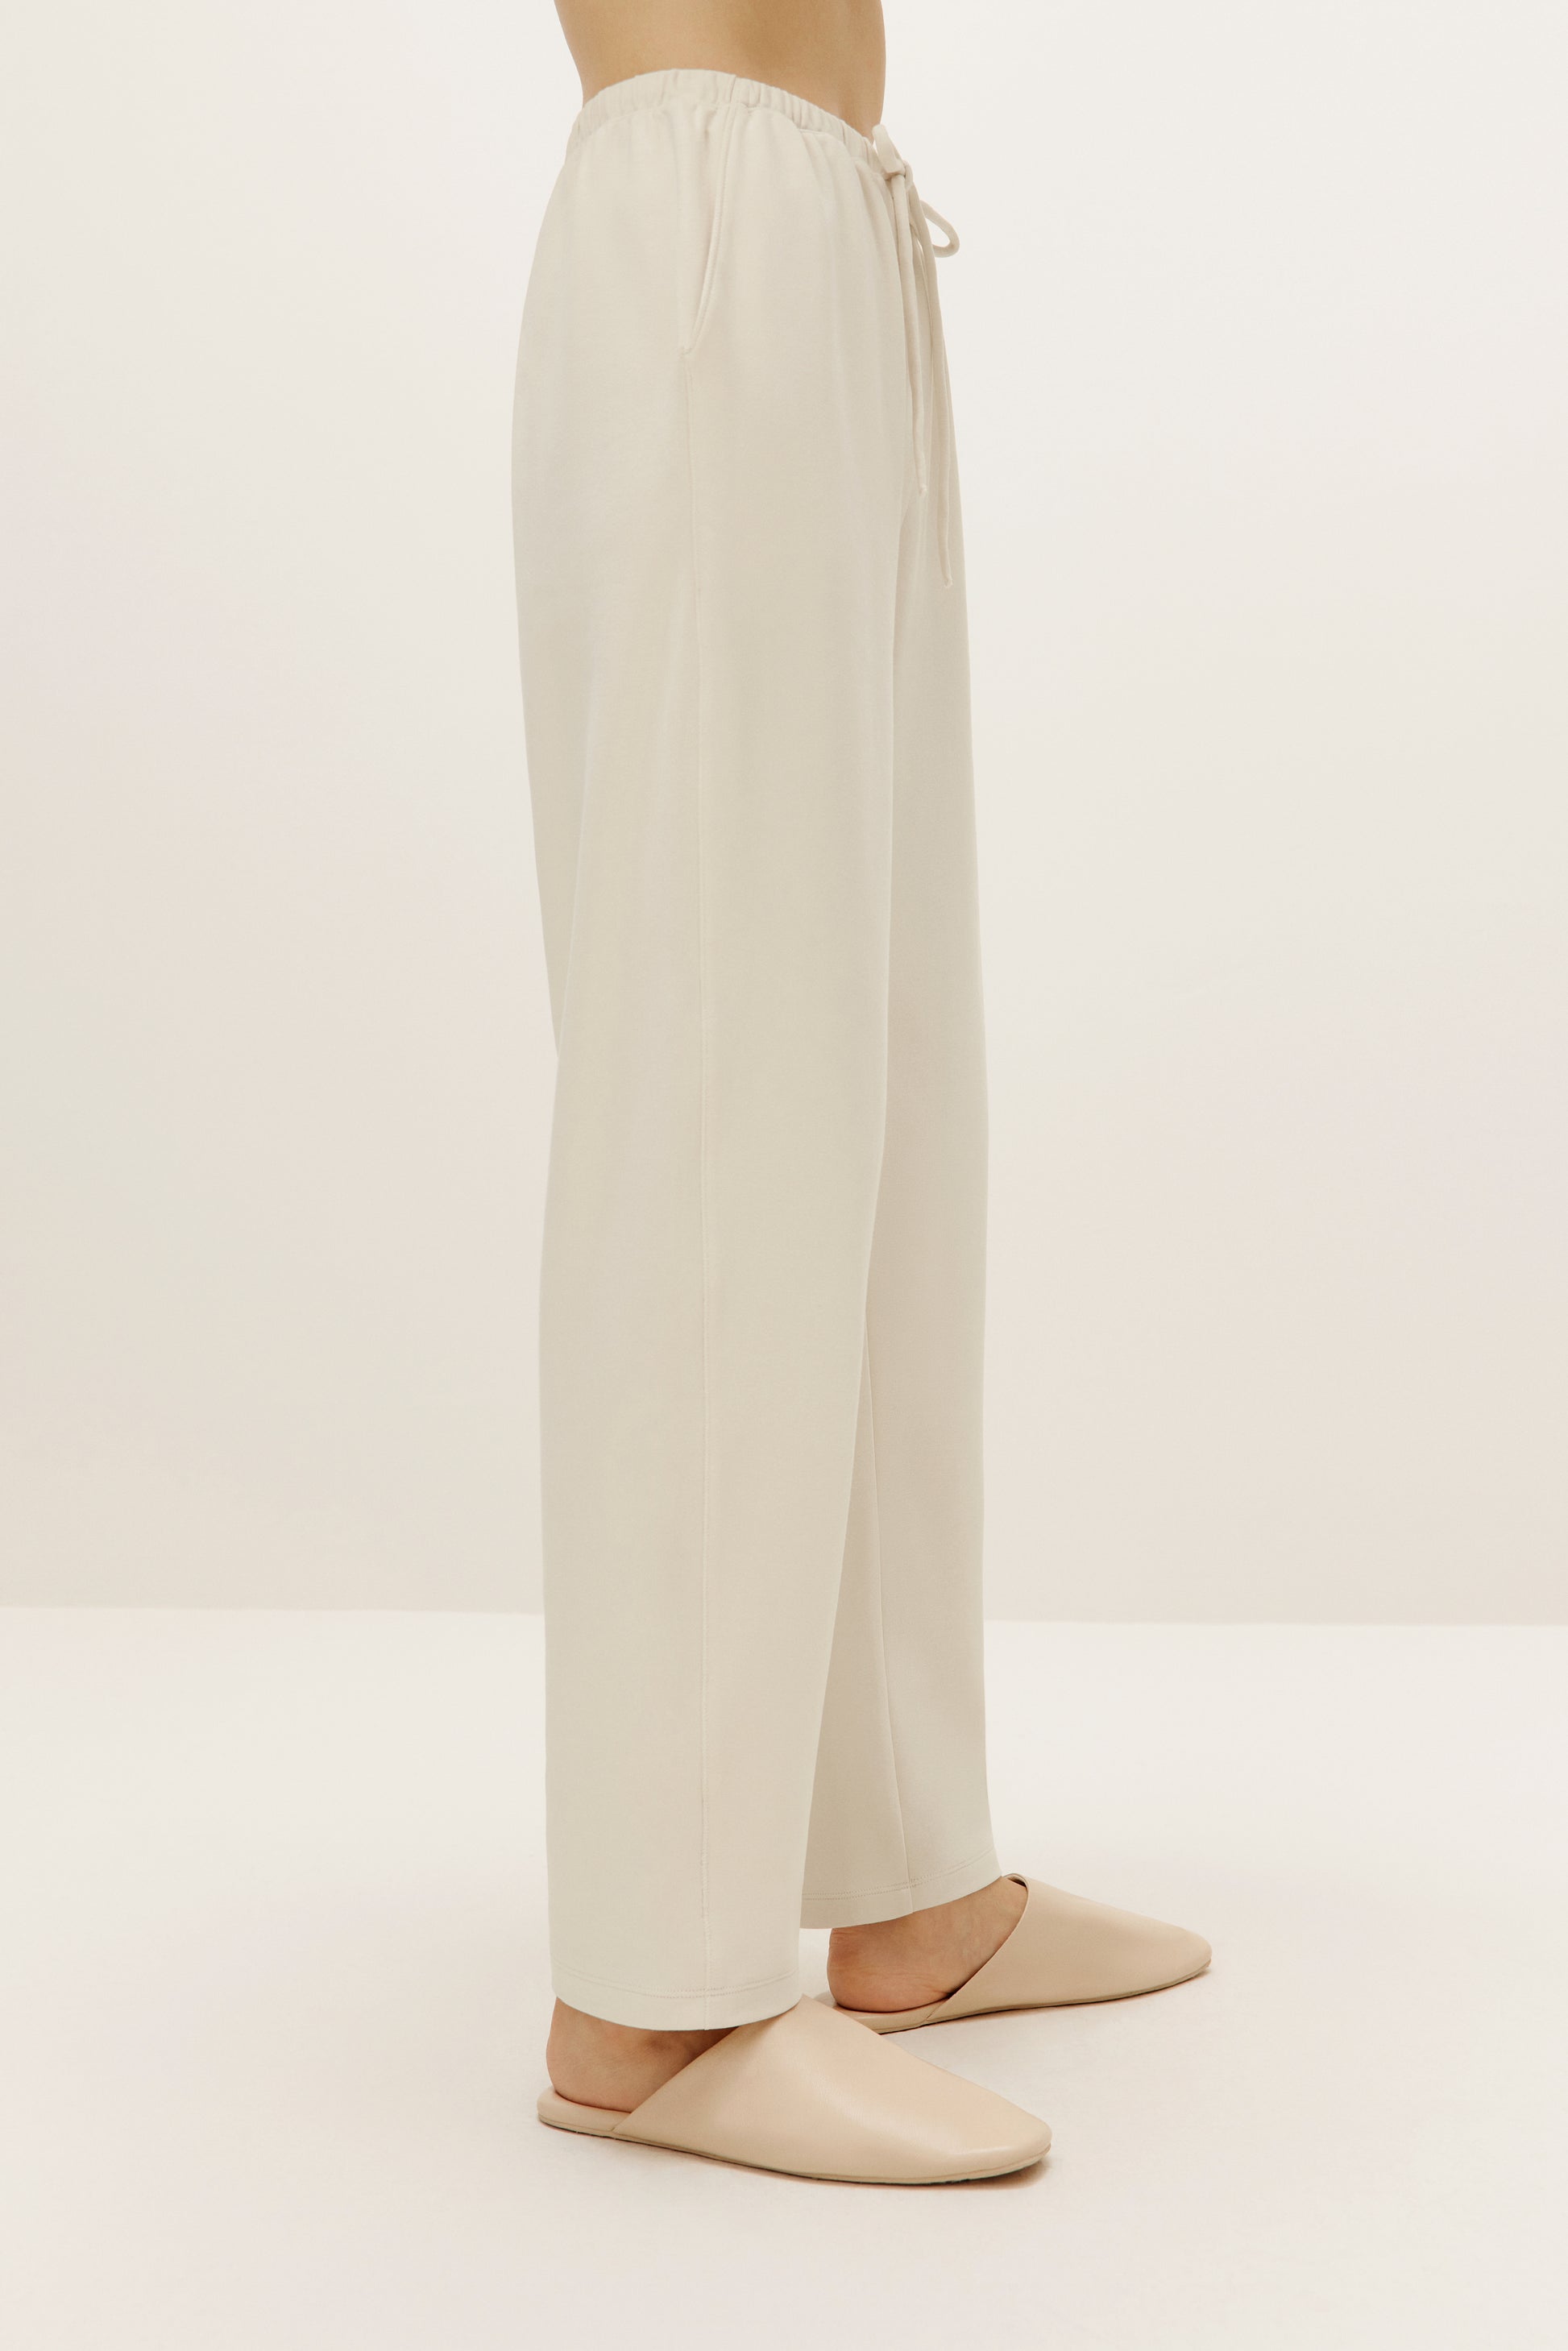 a pair of cream color pants from side